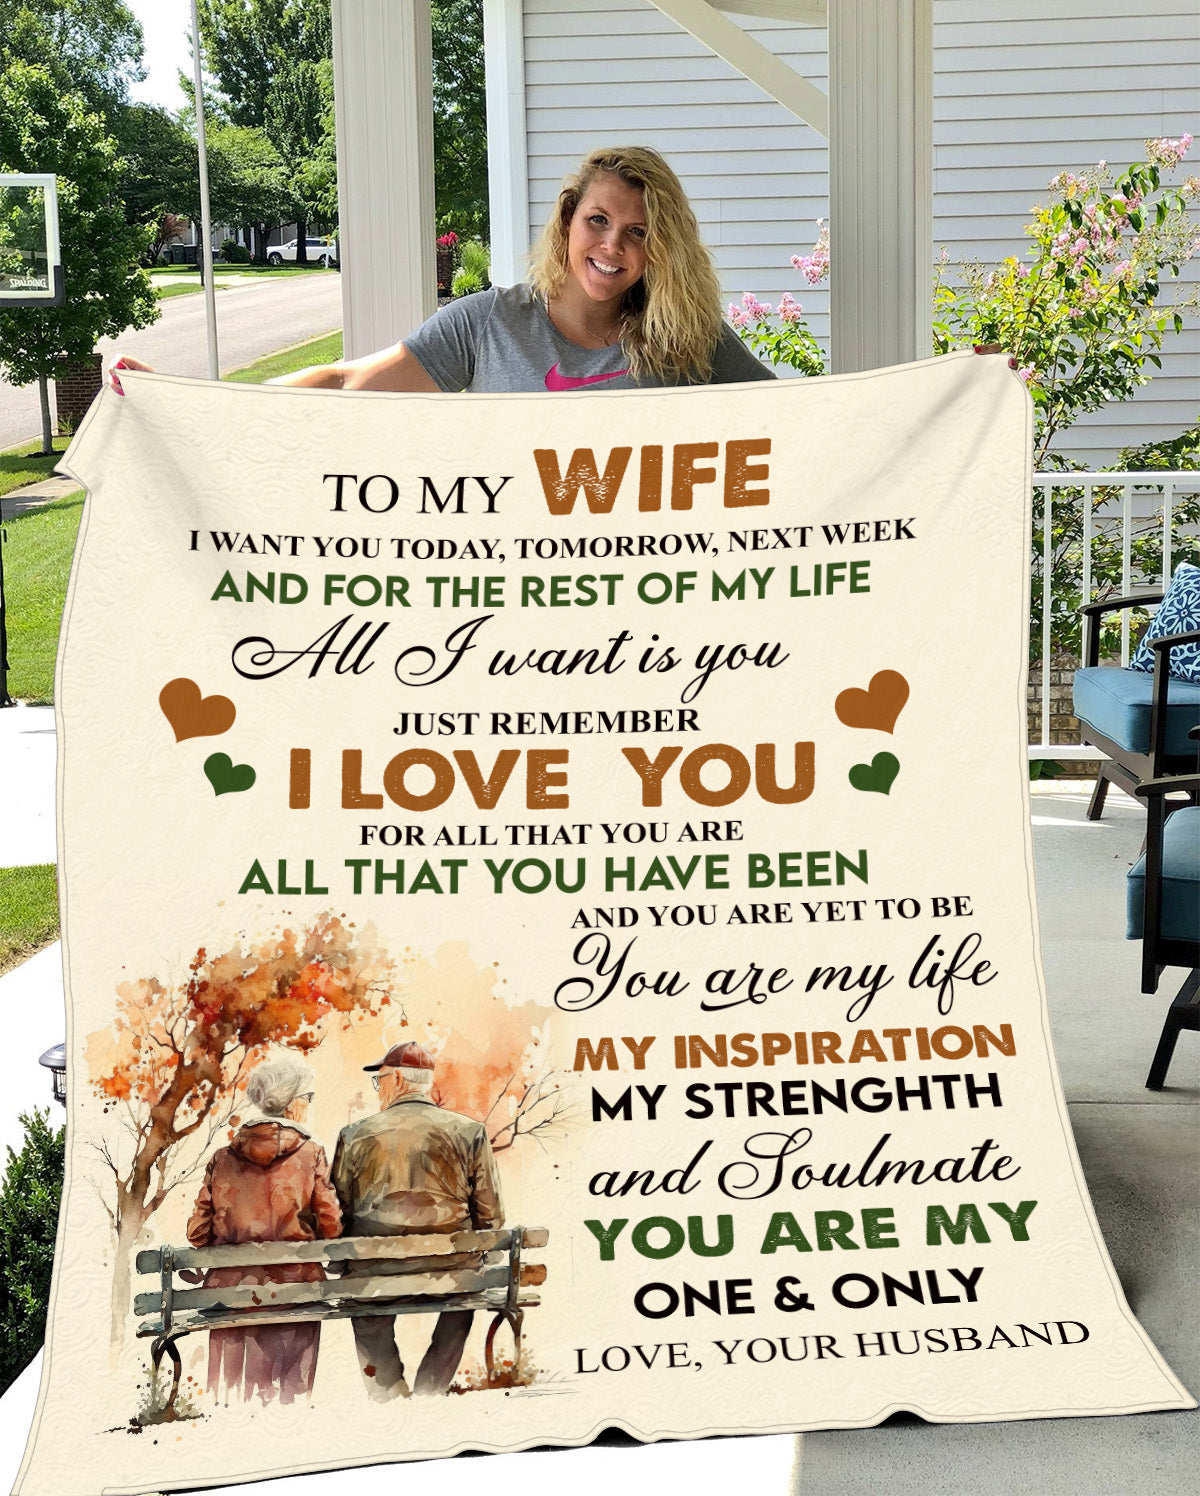 Wife For The Rest Of My Life Blanket | Premium Mink Sherpa Blanket 50x60